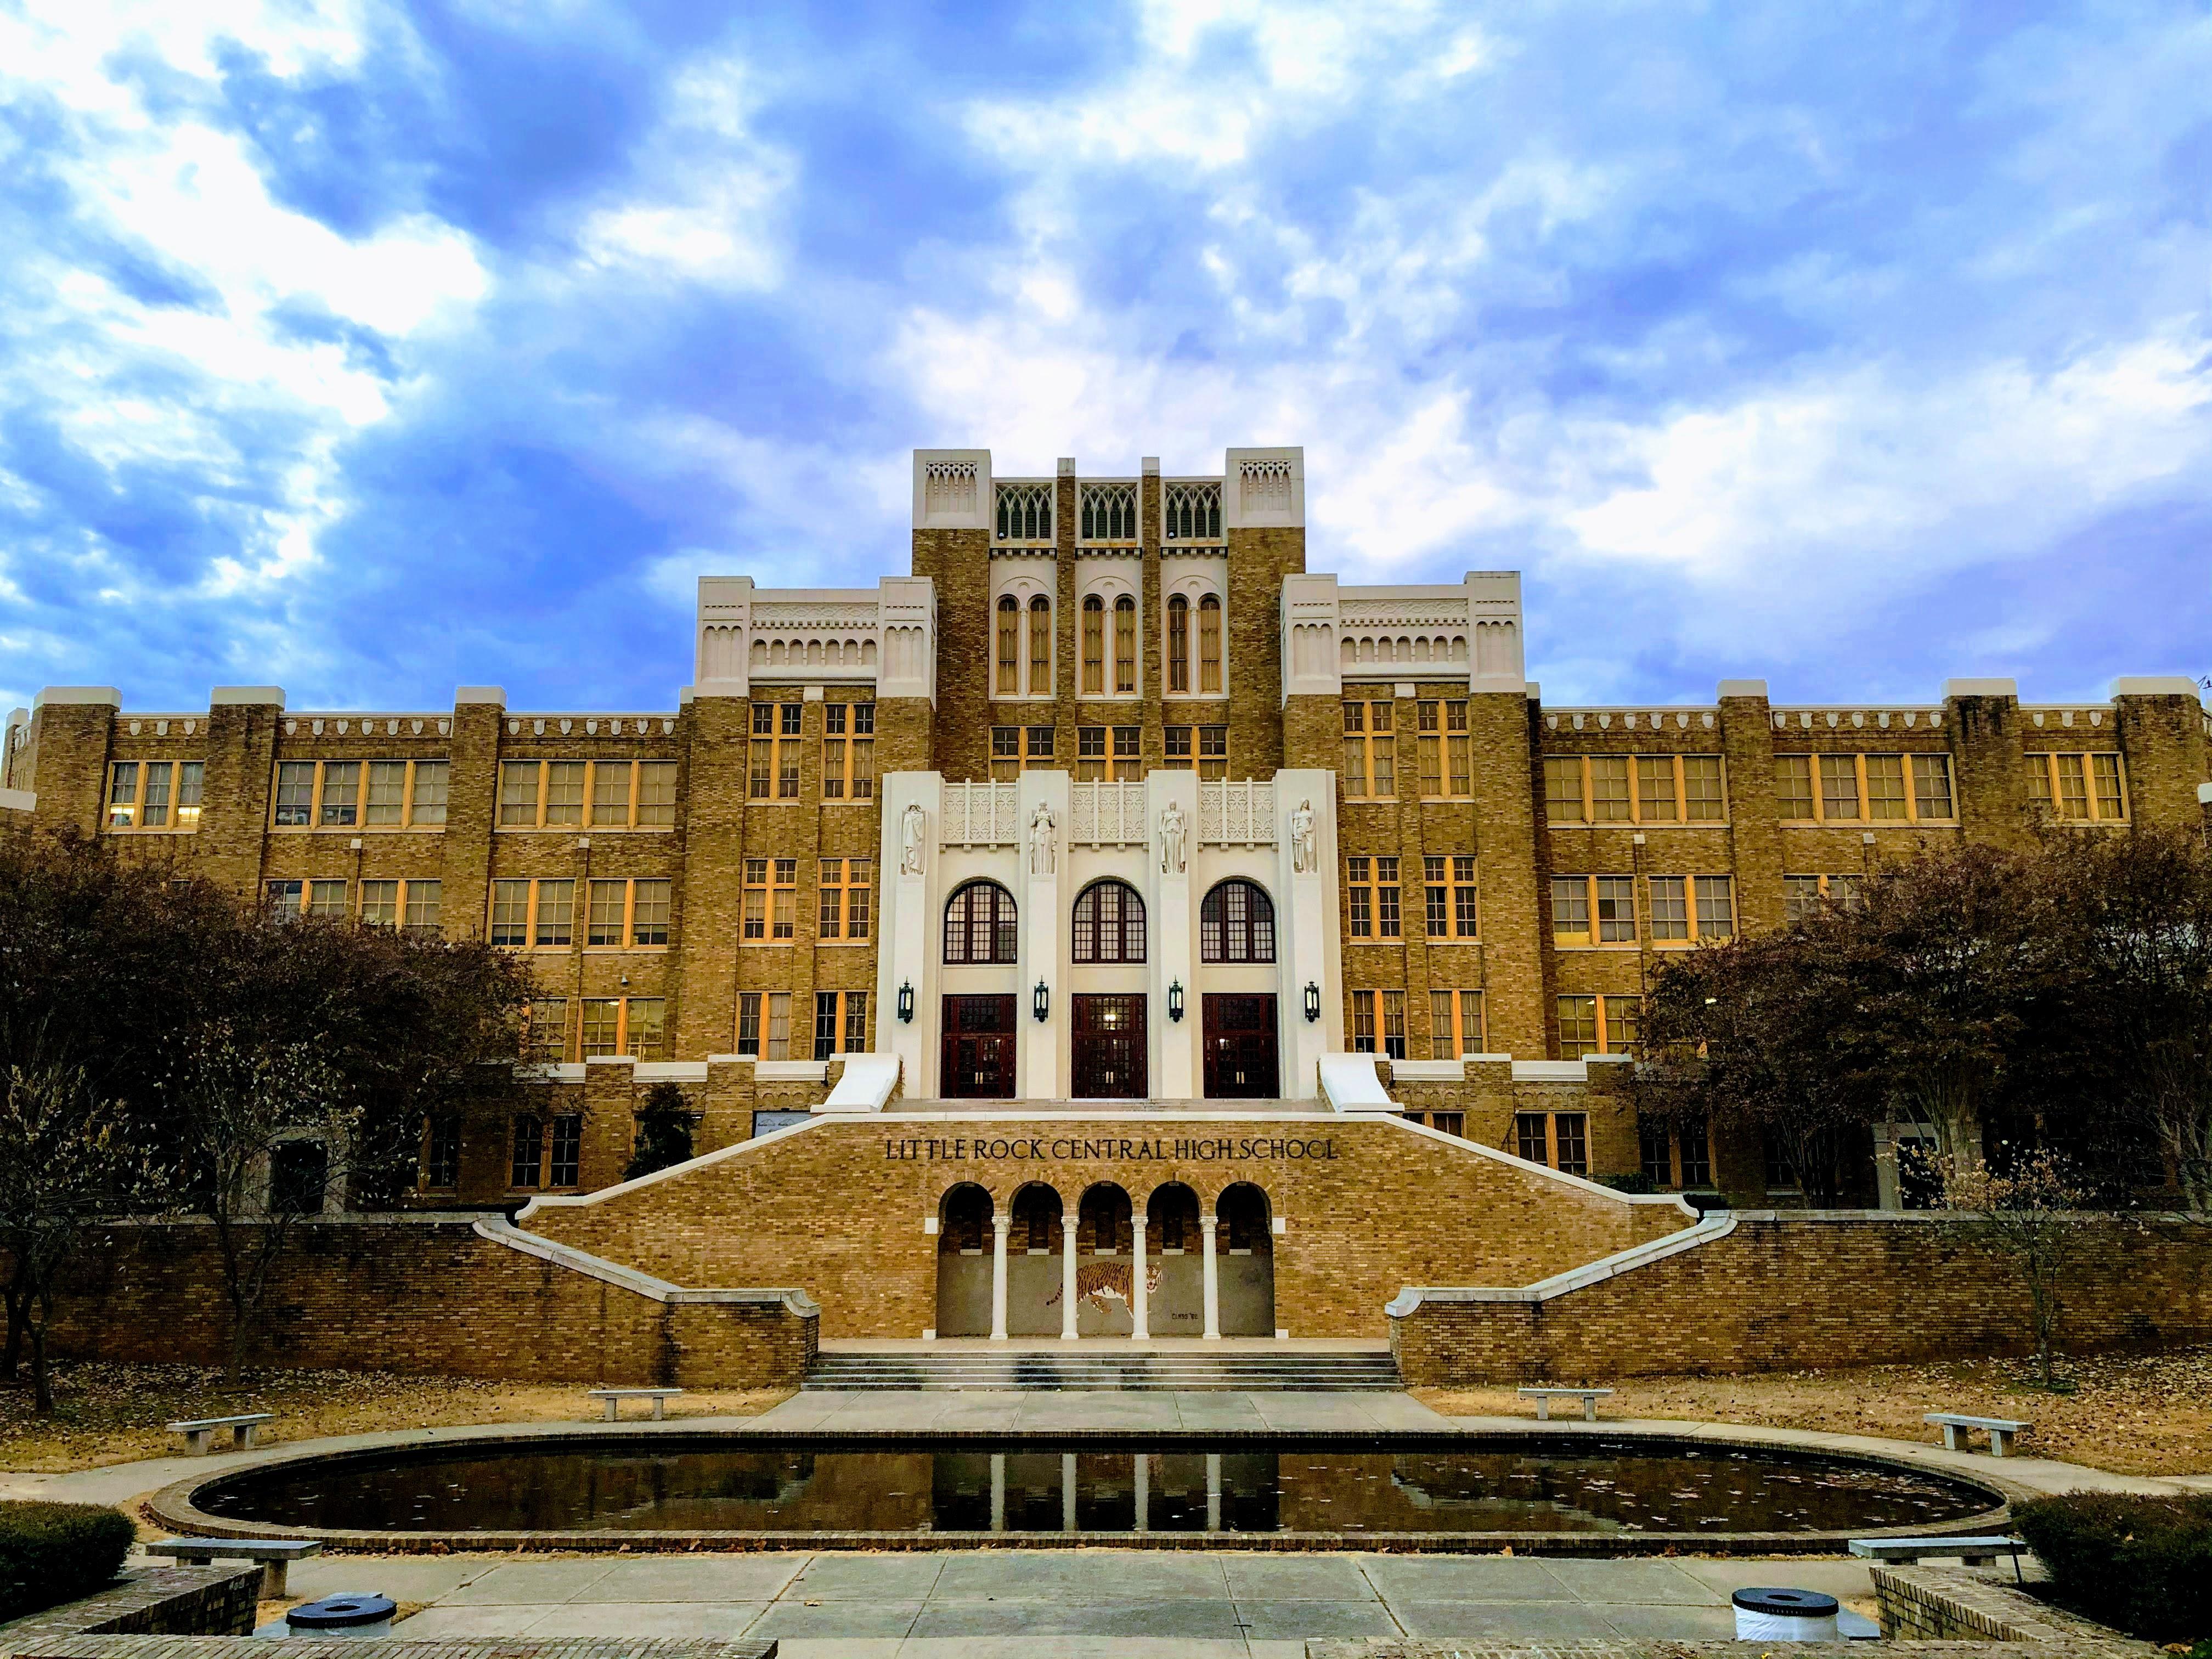 The front facade of Little Rock Central High School